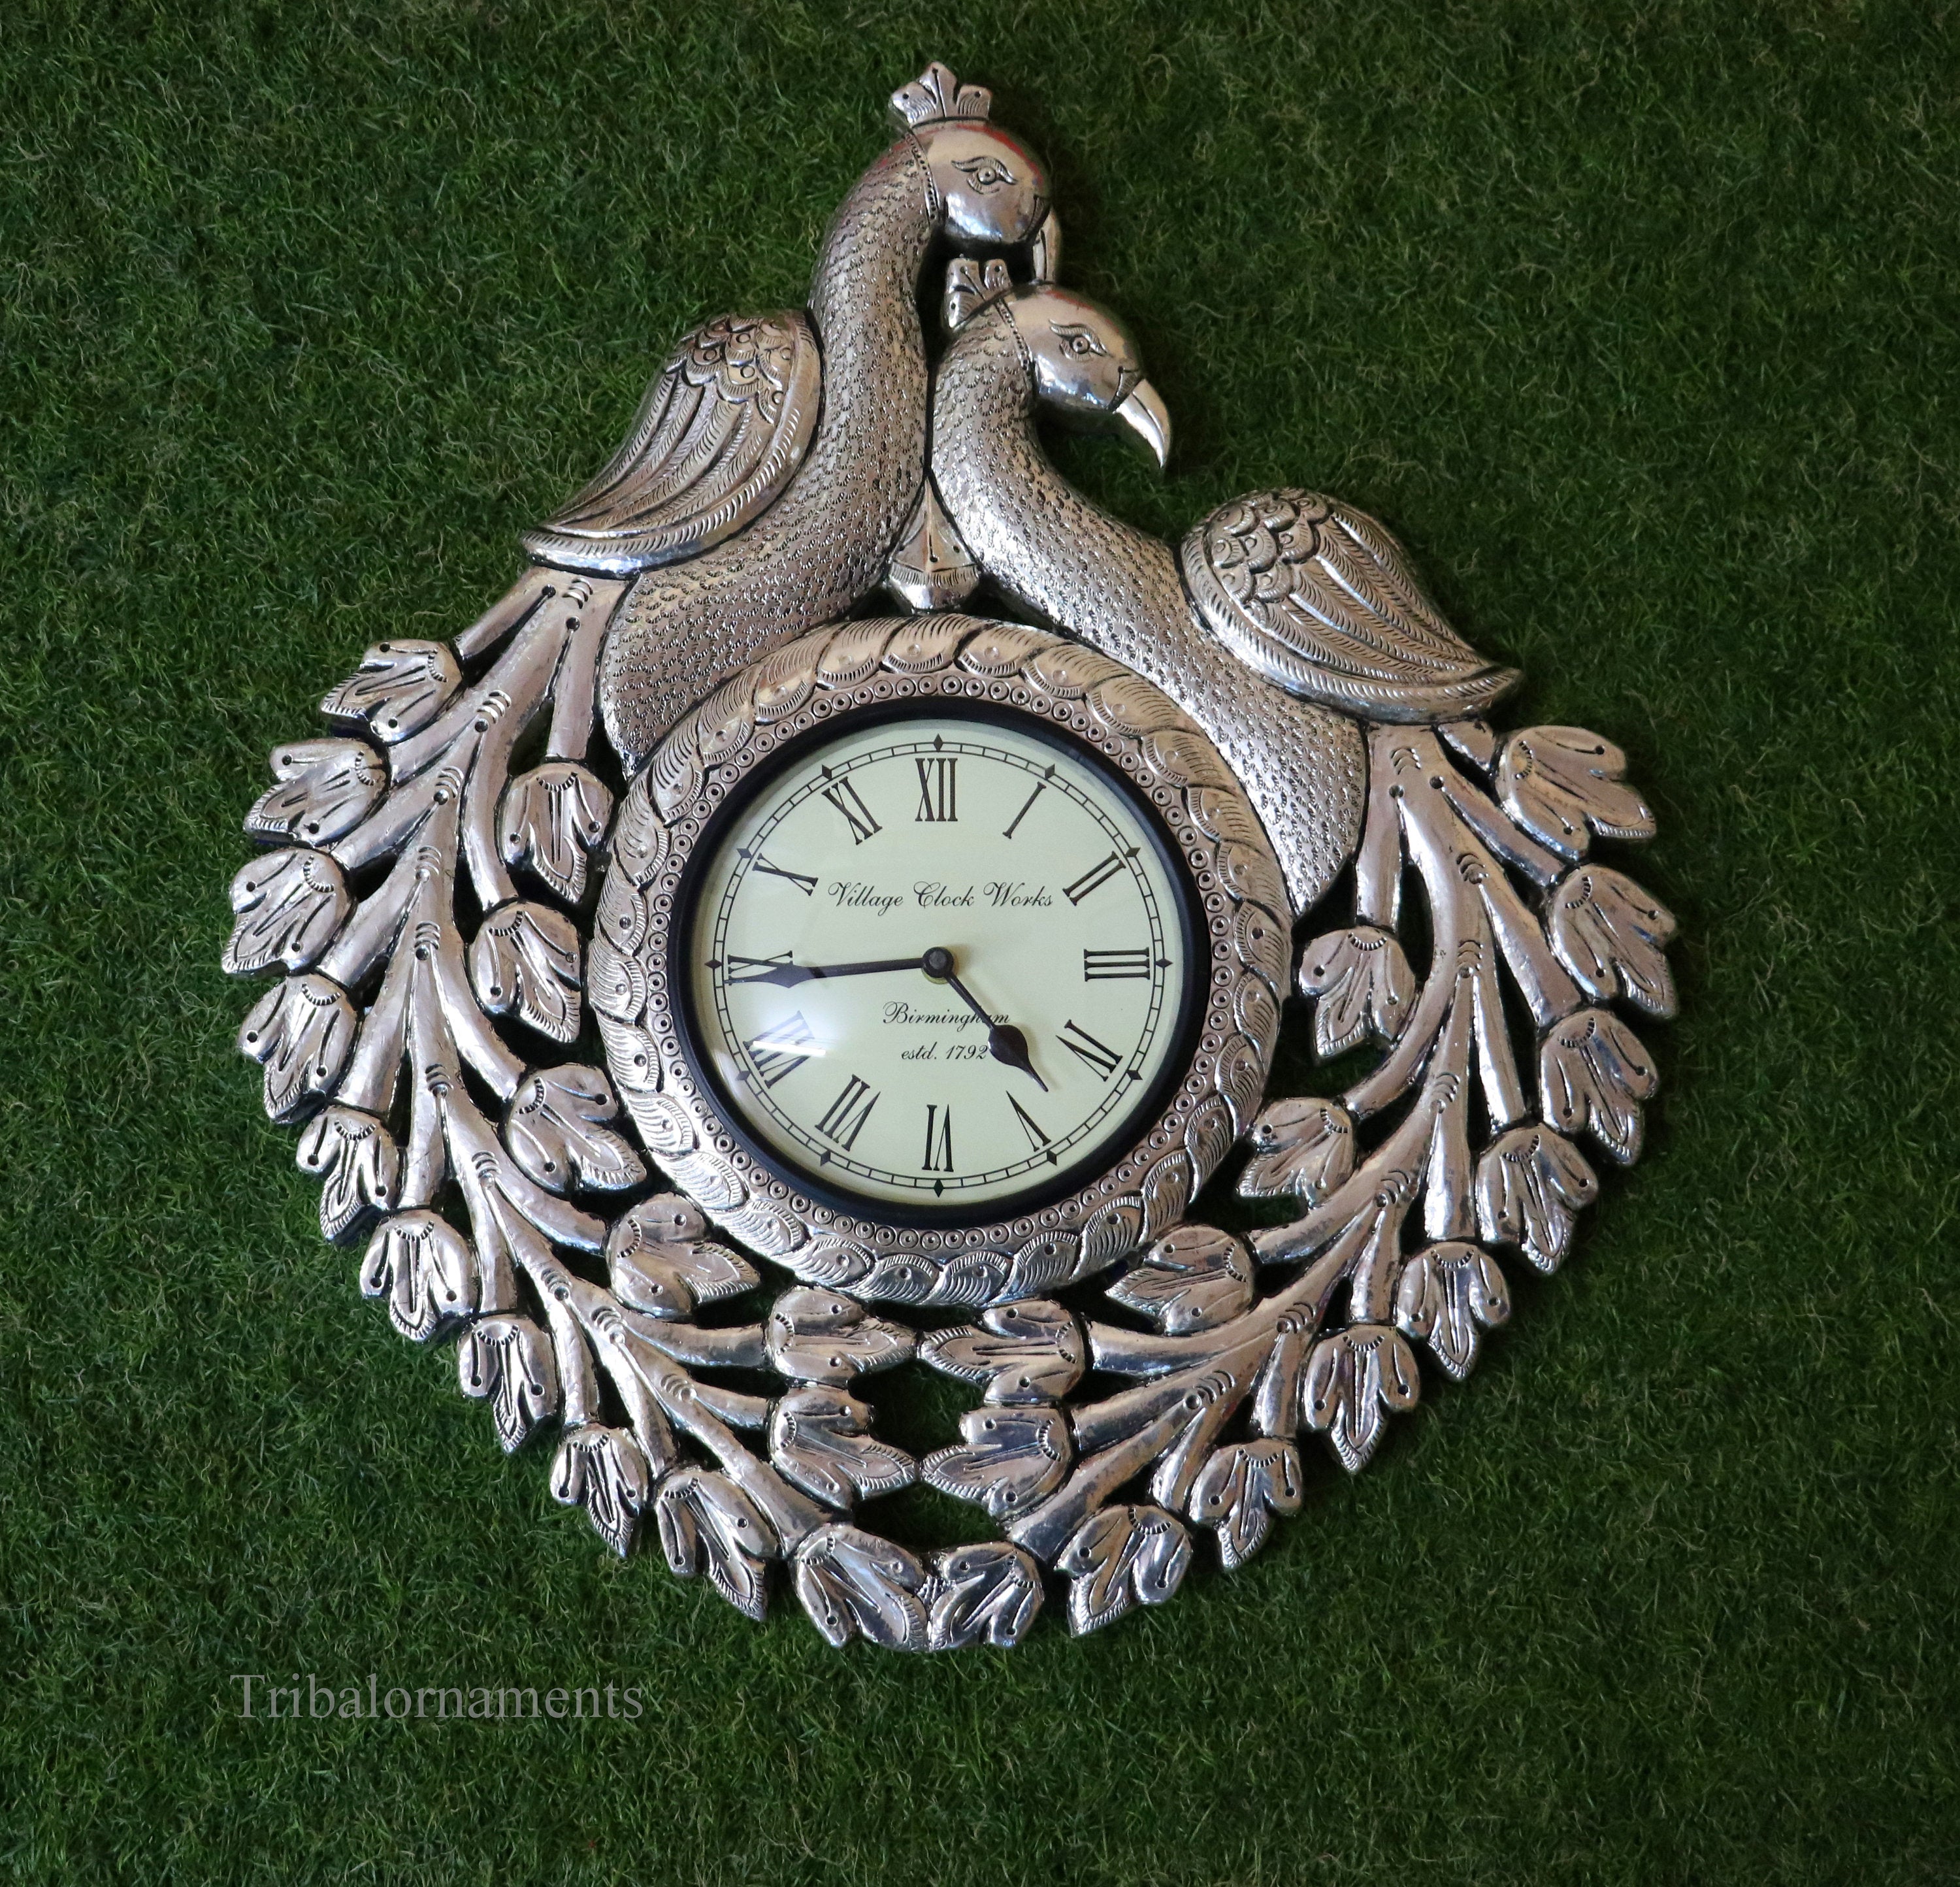 Antique Pocket Watch And Purse Wallpaper Background, Antique Bag And Watch,  Hd Photography Photo, Watch Background Image And Wallpaper for Free Download